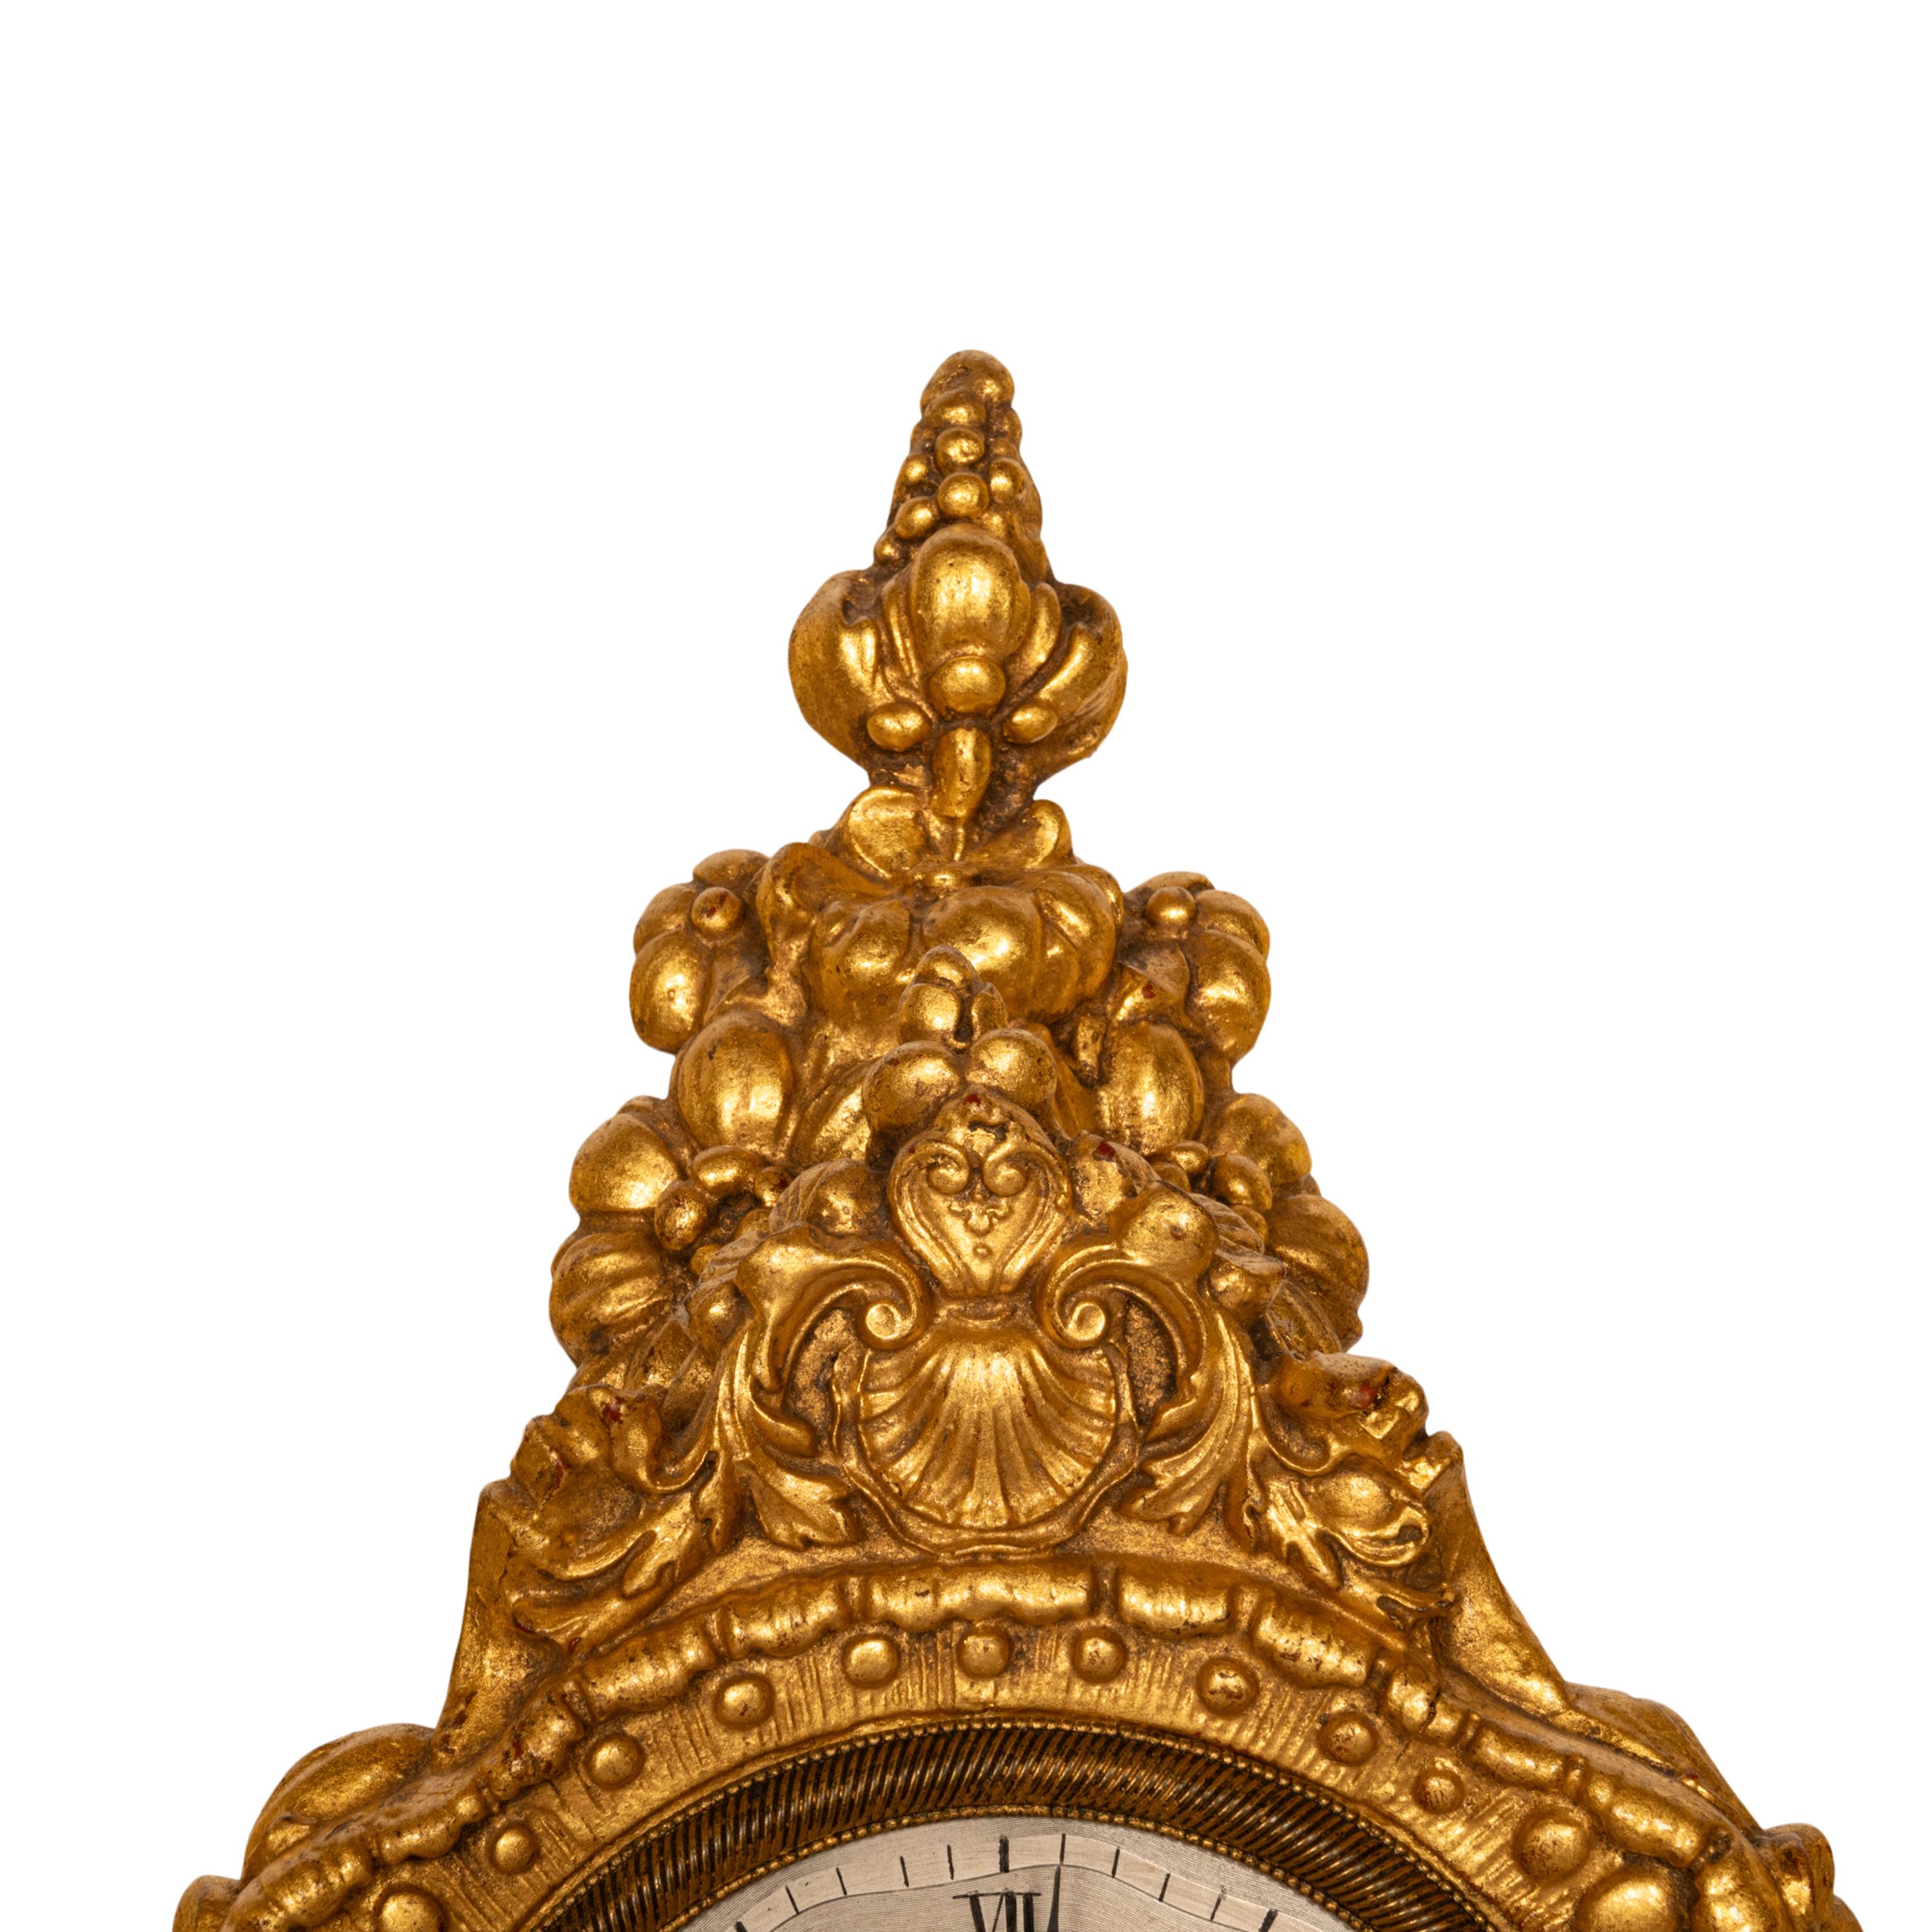 Fine Antique 19th Century French Rococo Gilded 8 Day Clock Sevres Porcelain 1830 For Sale 7